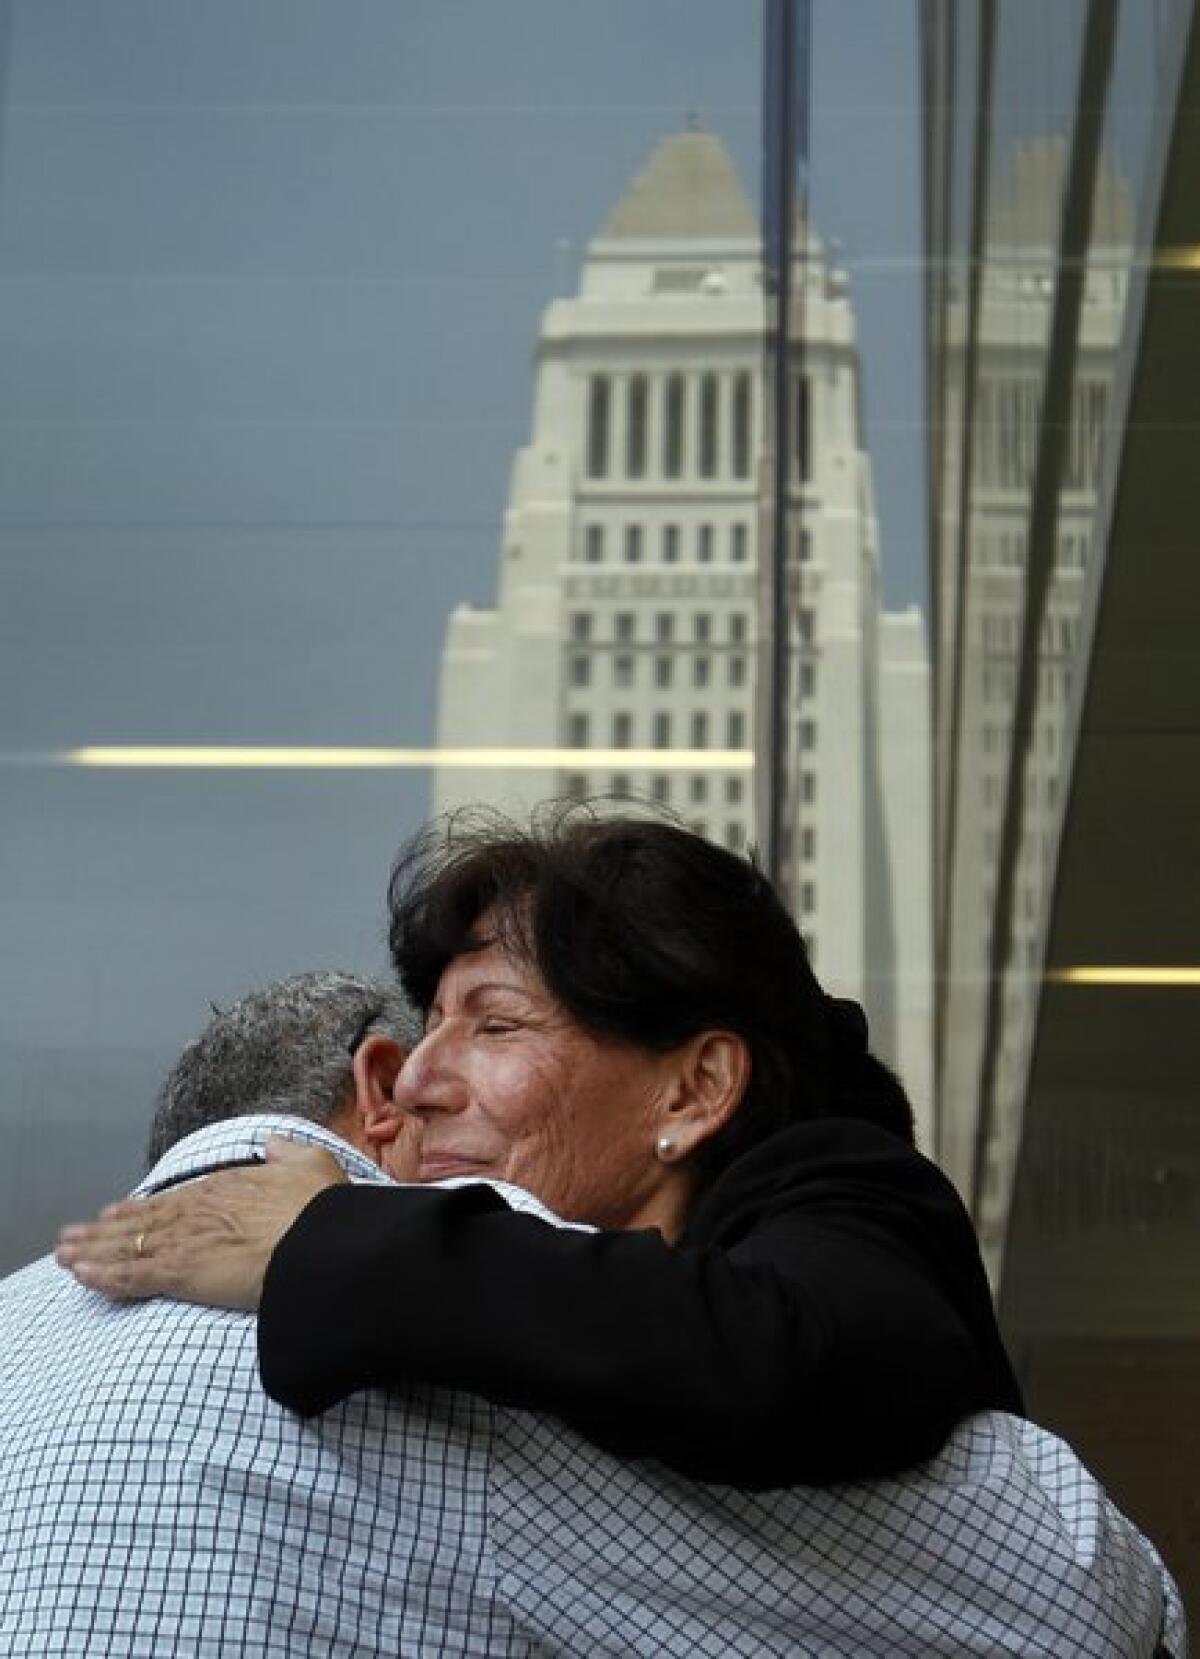 Julie Butcher, mother of victim Matthew Butcher, gets a hug during a news conference at LAPD headquarters on Aug. 5, 2010.